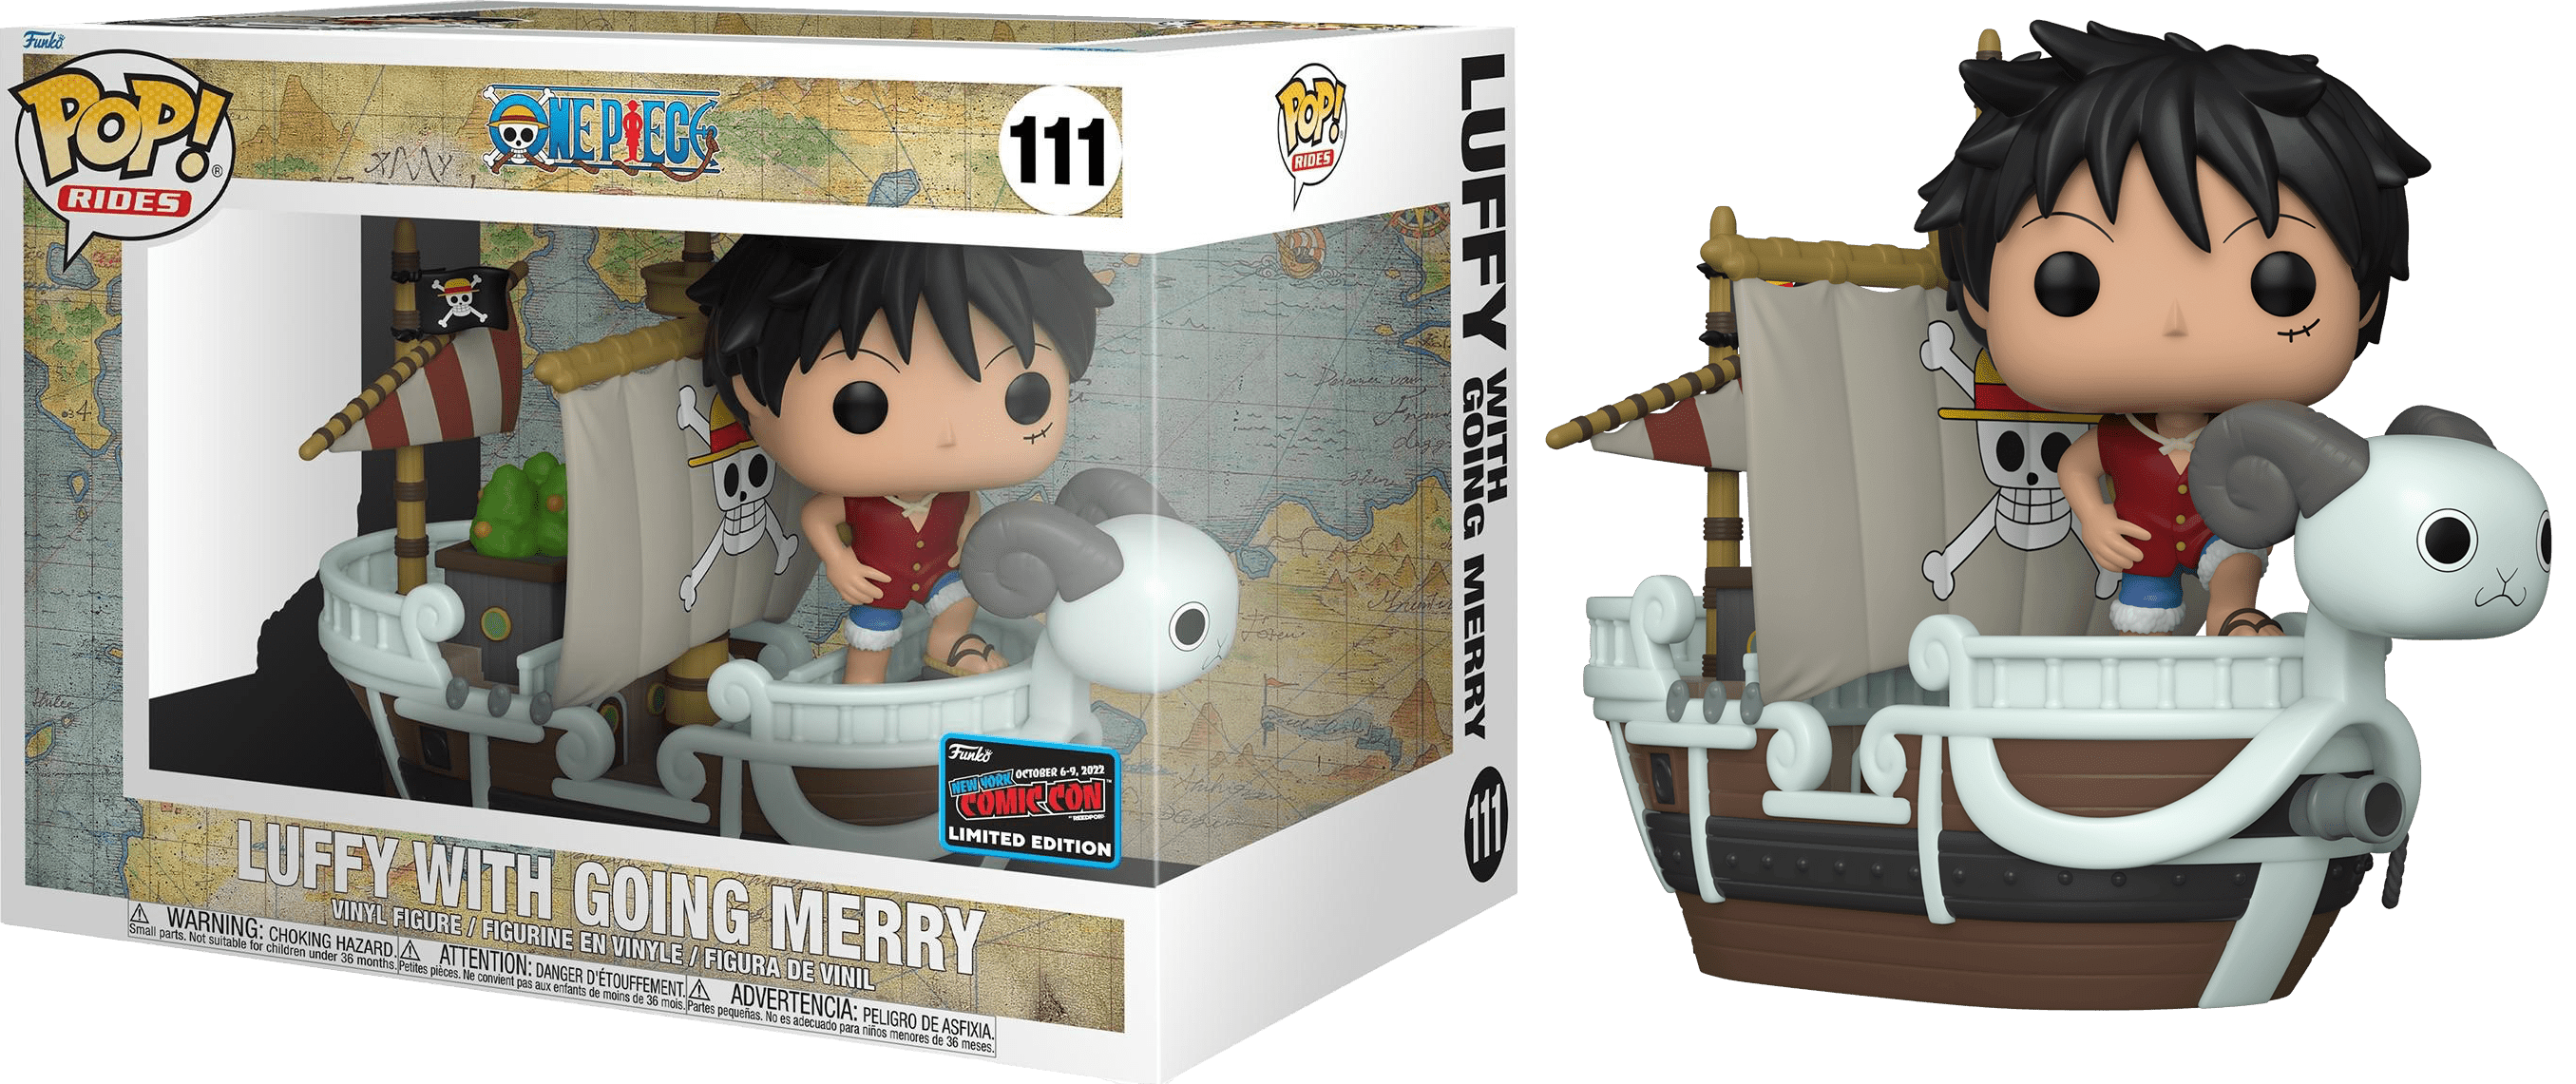 Funko POP! Rides One Piece Luffy with Going Merry #111 NYCC 2022 Convention  Sticker Exclusive